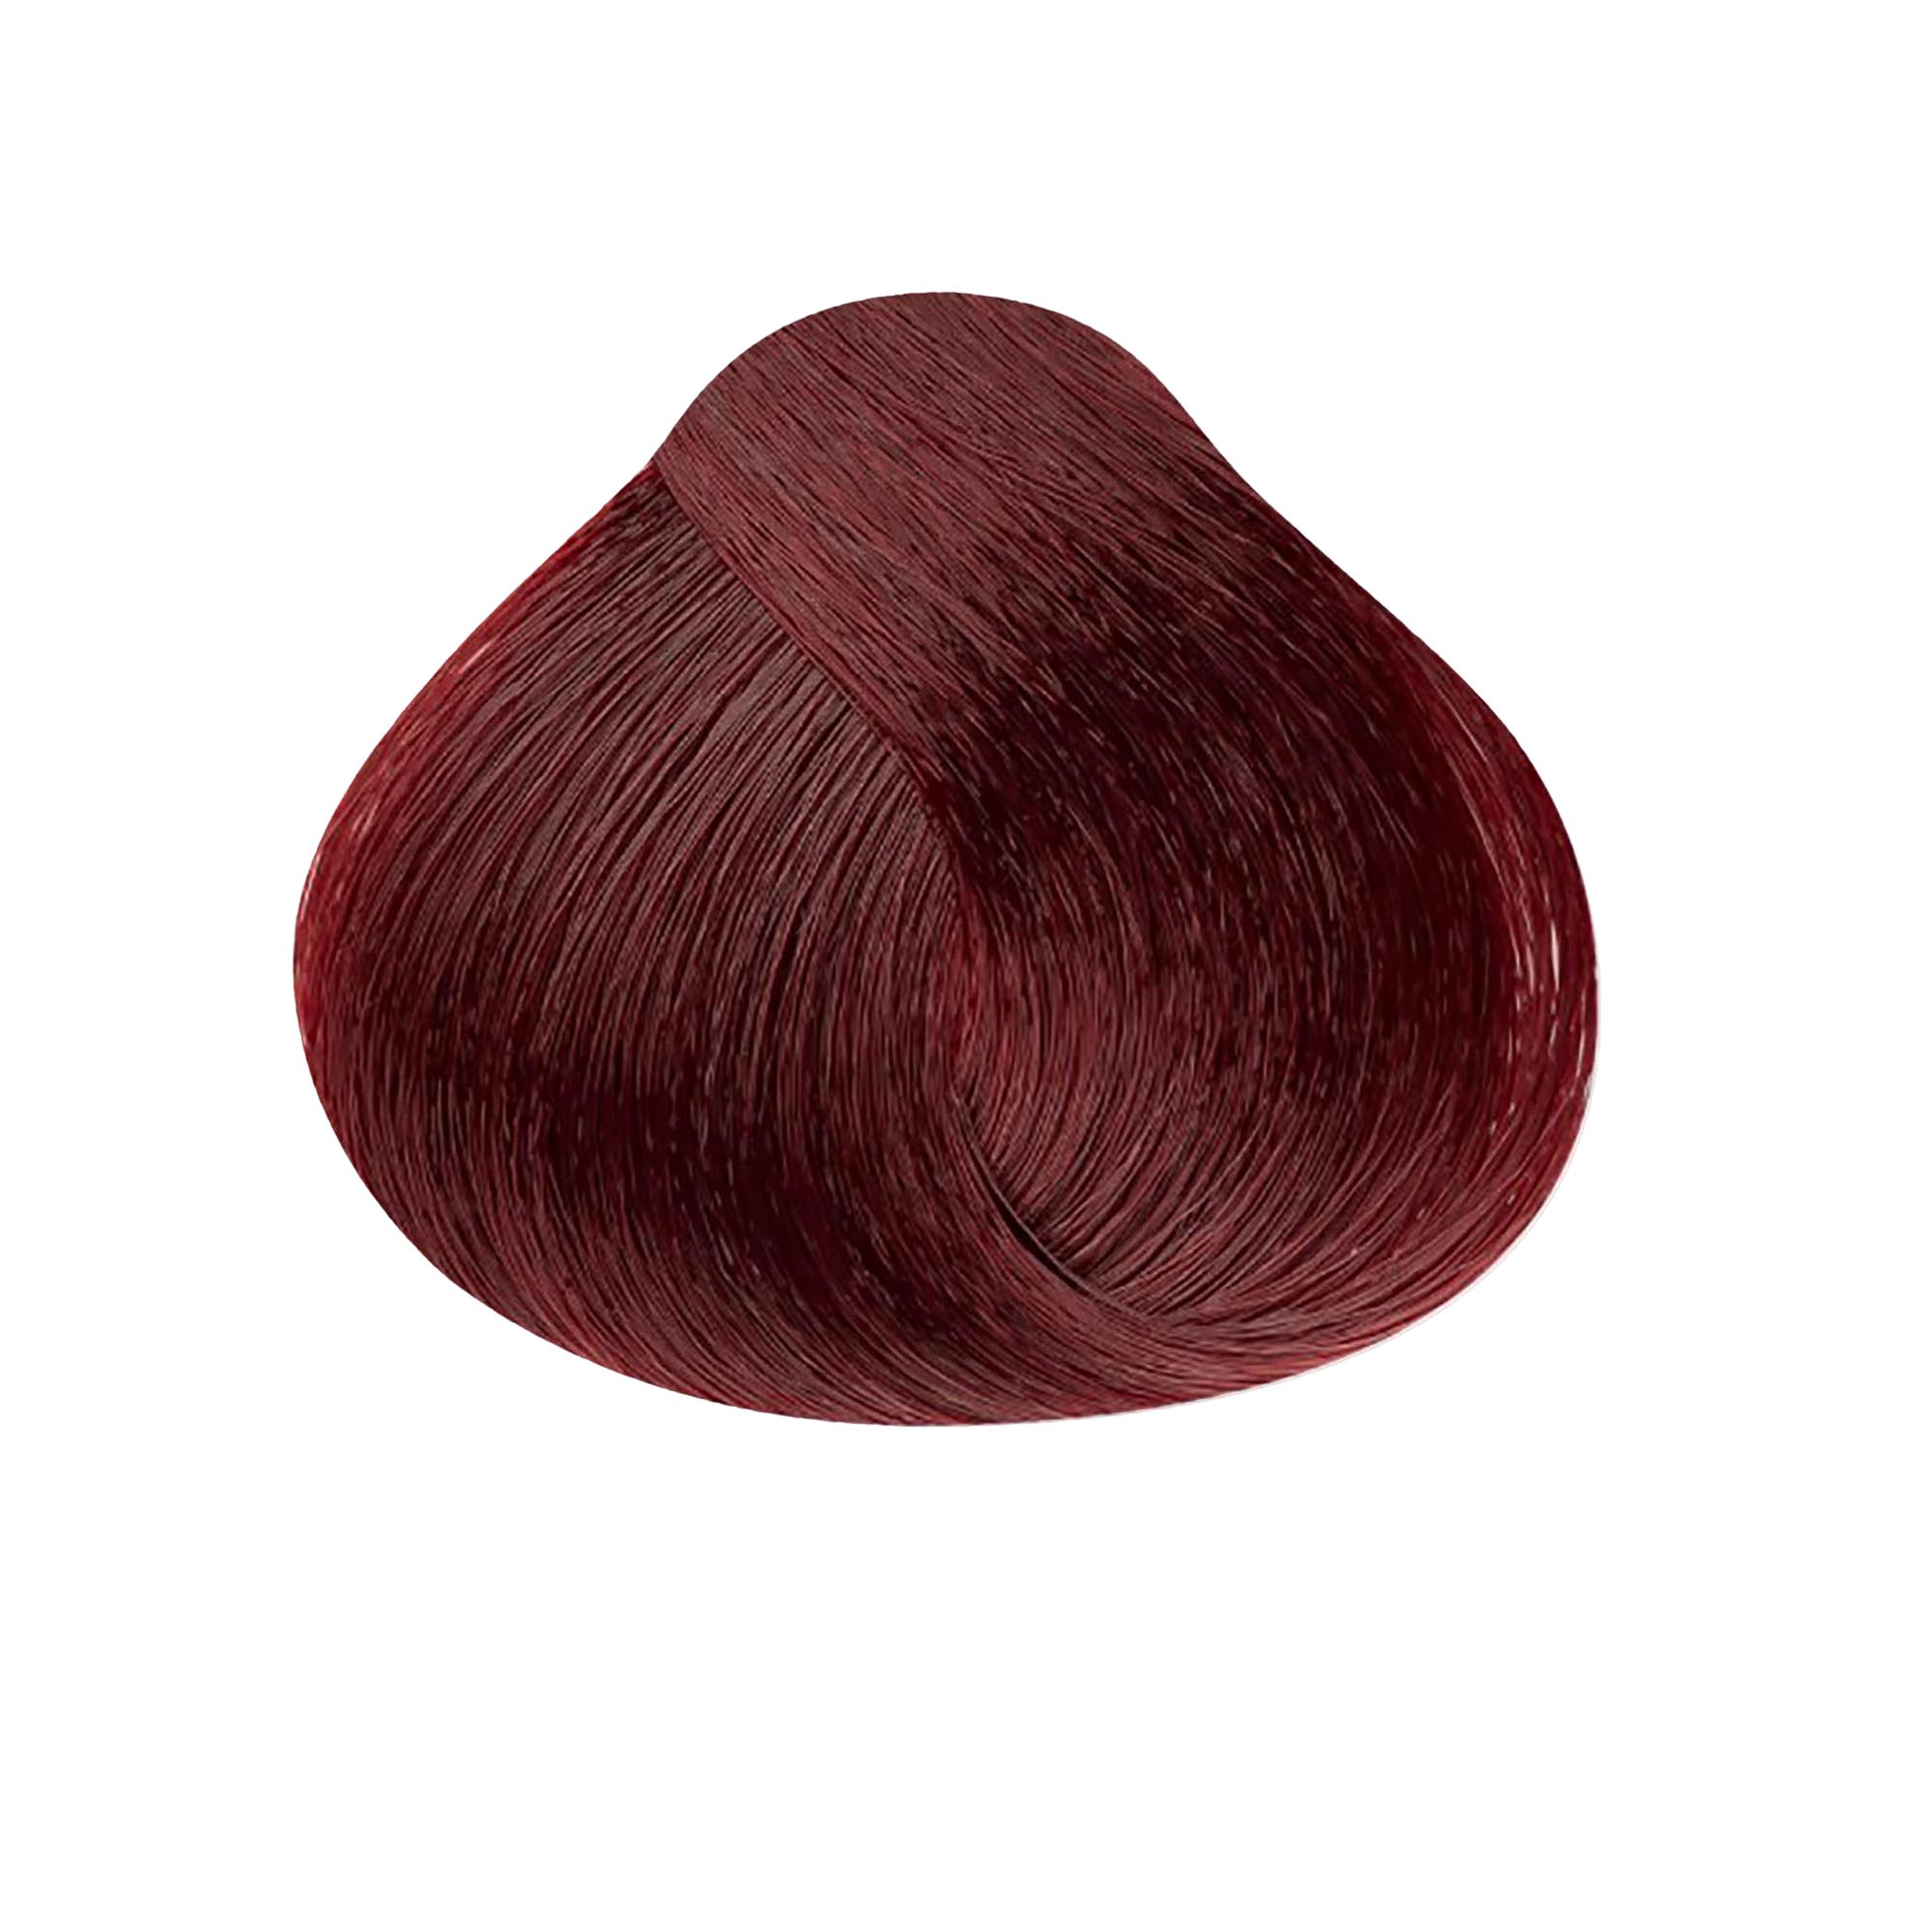 Satin Professional Hair Color / 5MR Light Red Mahogany Chestnut / Swatch